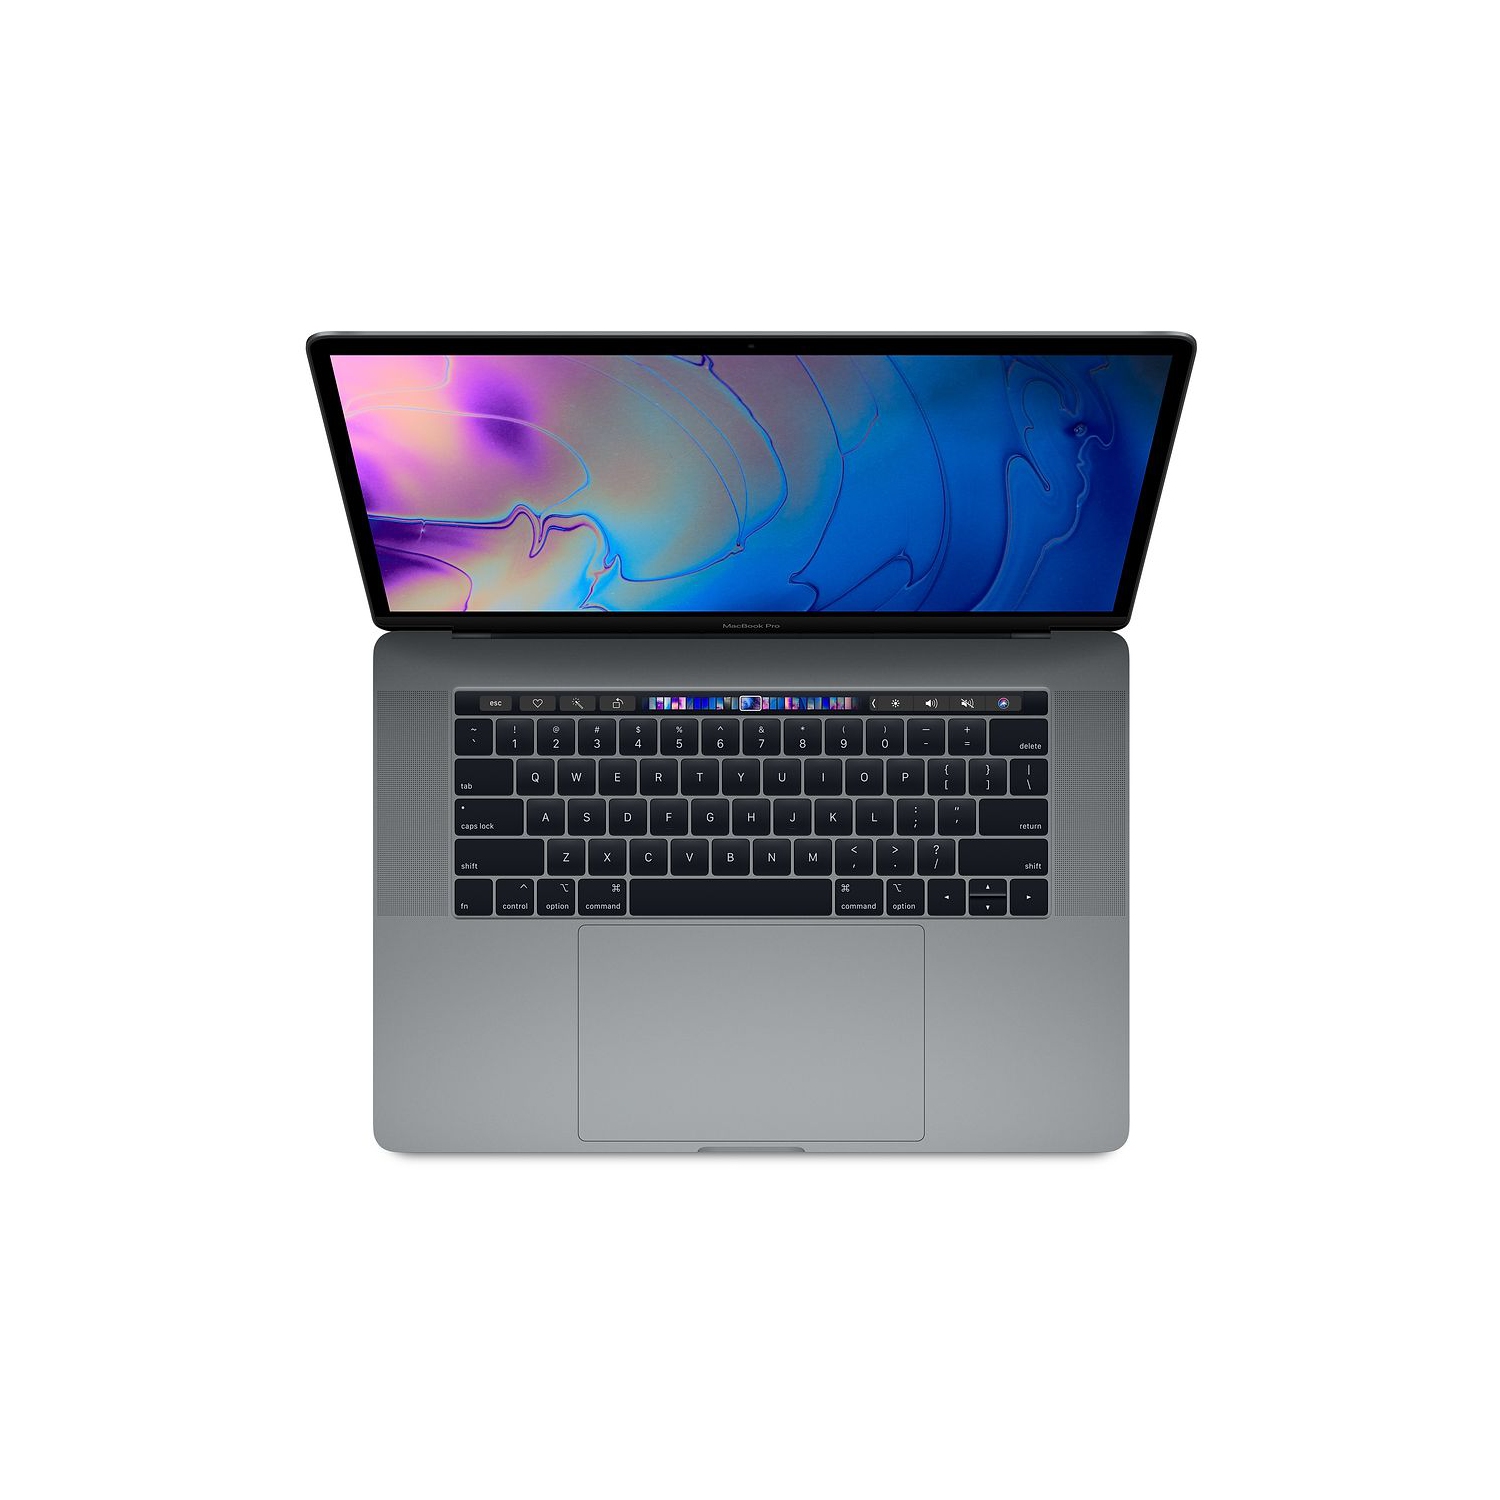 Refurbished (Excellent) - Apple MacBook Pro w/ Touch Bar 16"(2019 Model) - Space Grey (Intel Core i7 2.6GHz/512GB SSD/32GB RAM)